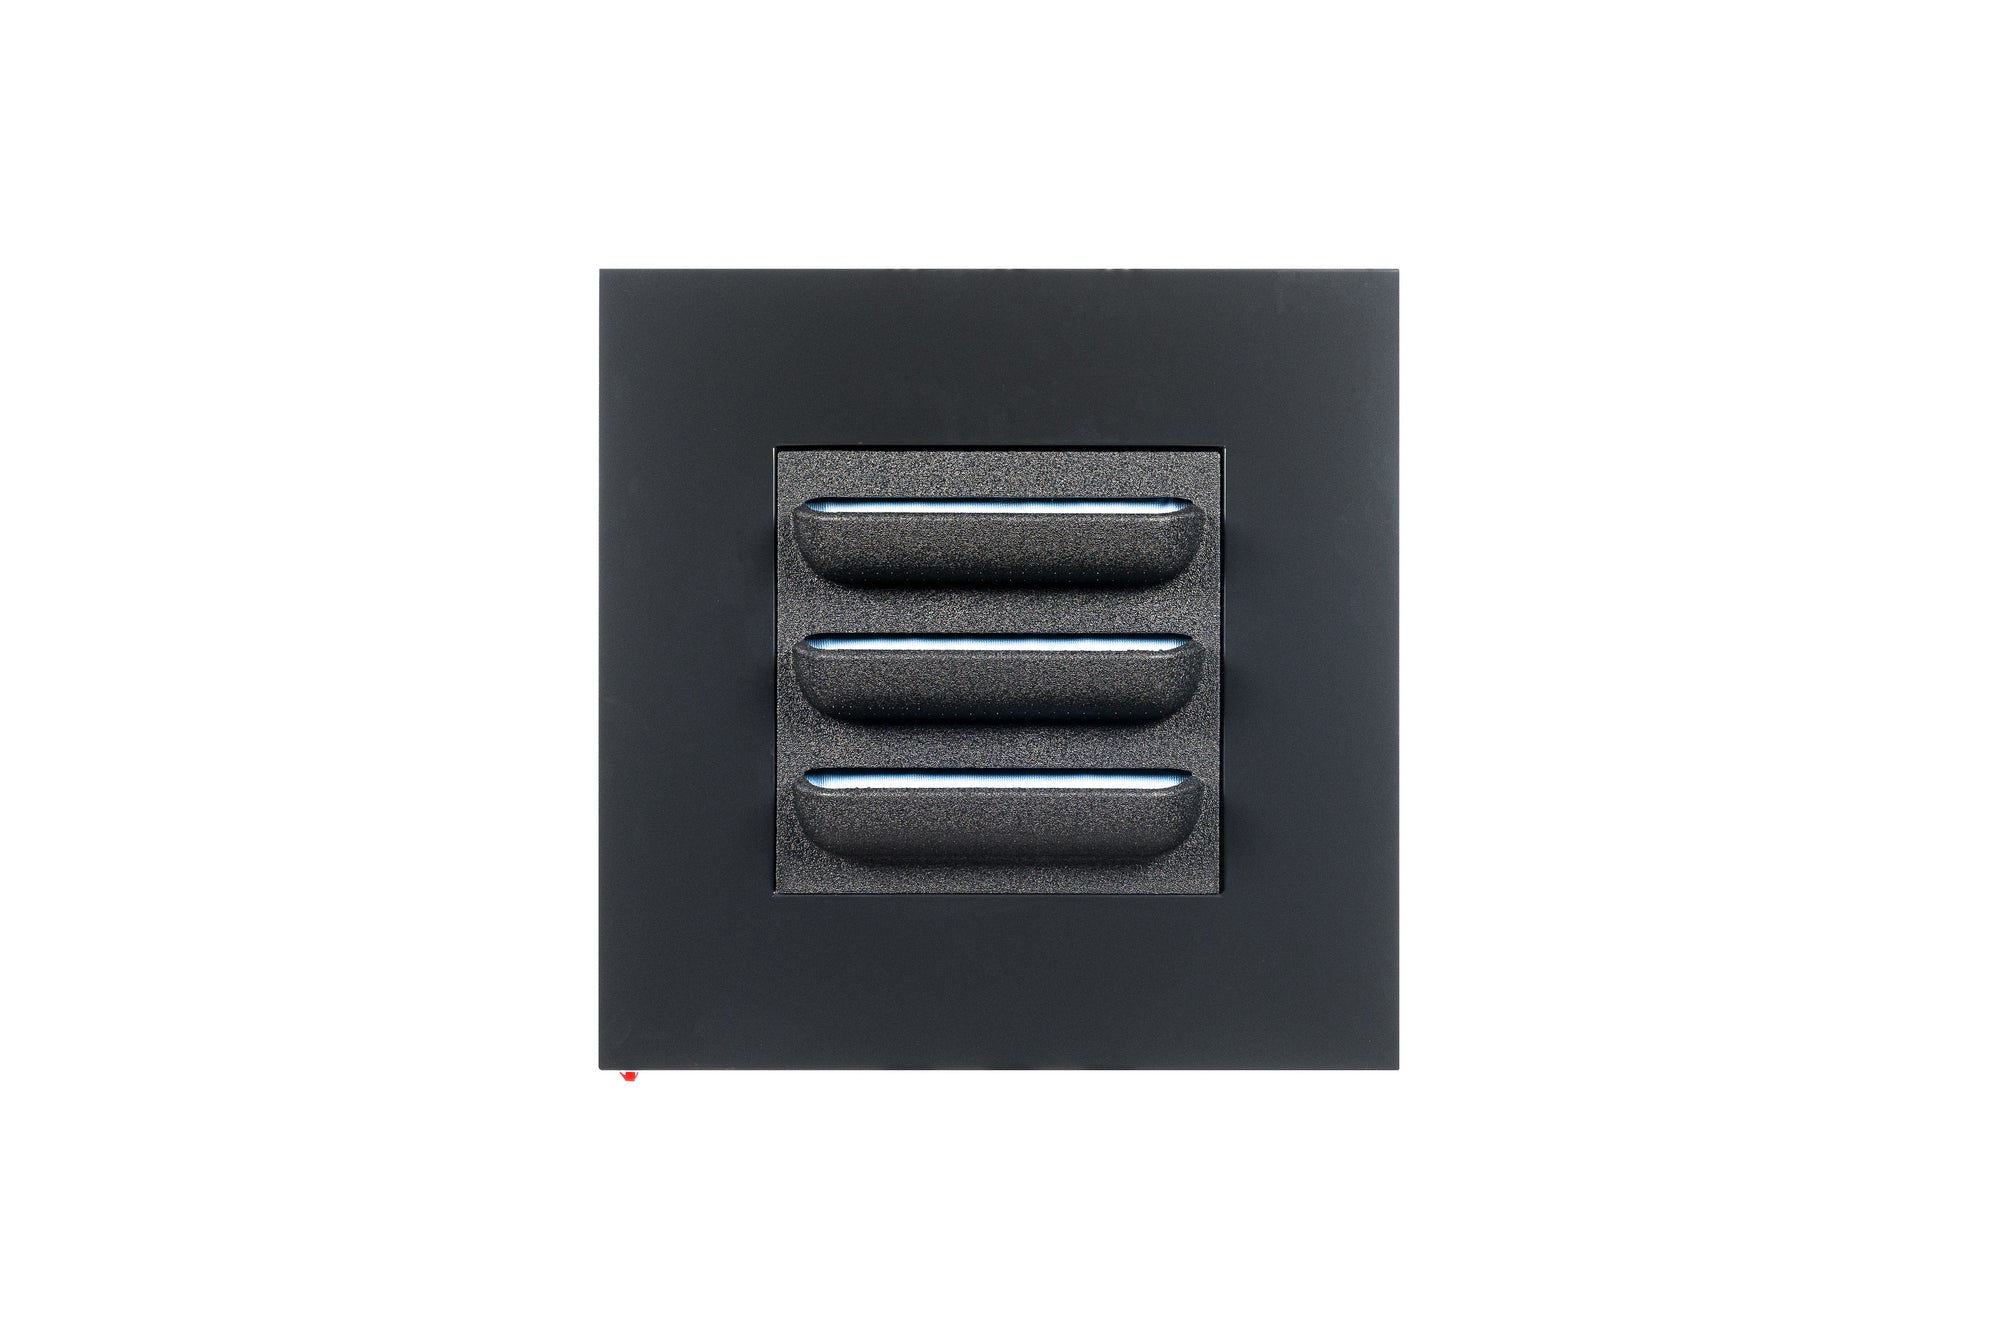 LIVE PICTURE - Living wall frame - 72cm - Black